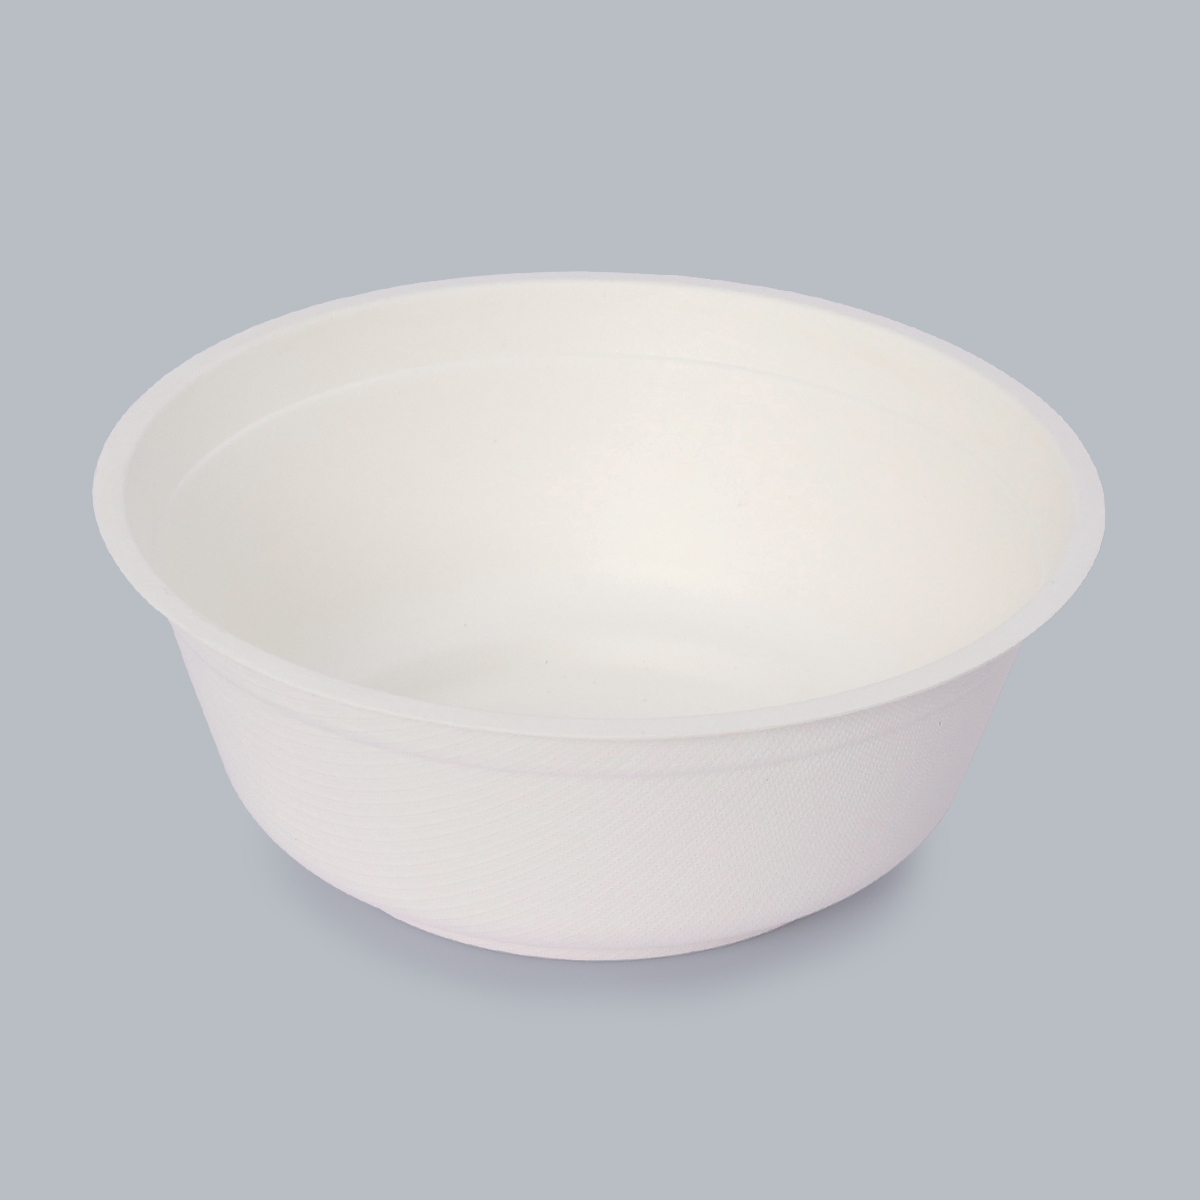 Round bowls Eco-Friendly Food Containers Tableware 910ml Round Bowl